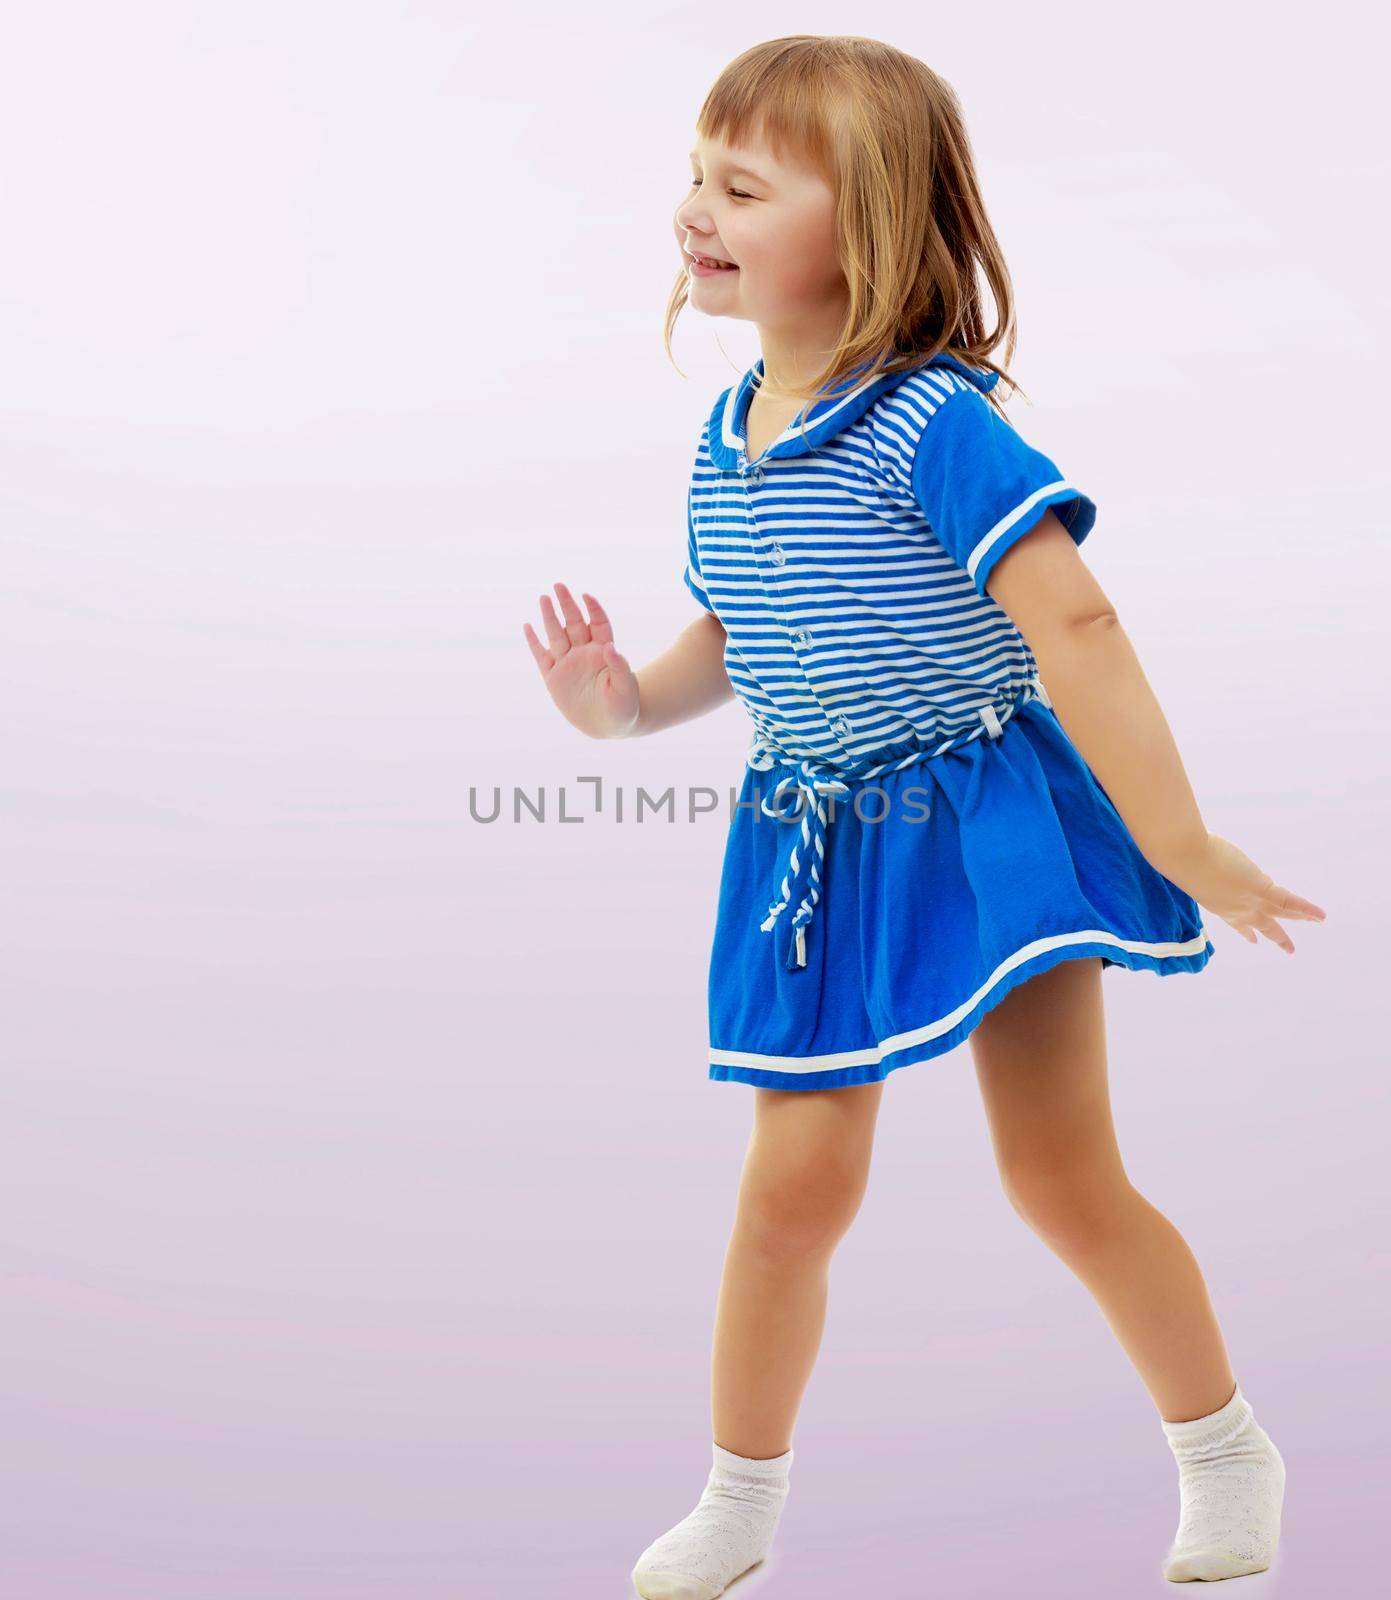 On a purple background, smooth transition from dark to light. Cute little girl in a short blue dress and likes posing for the camera.